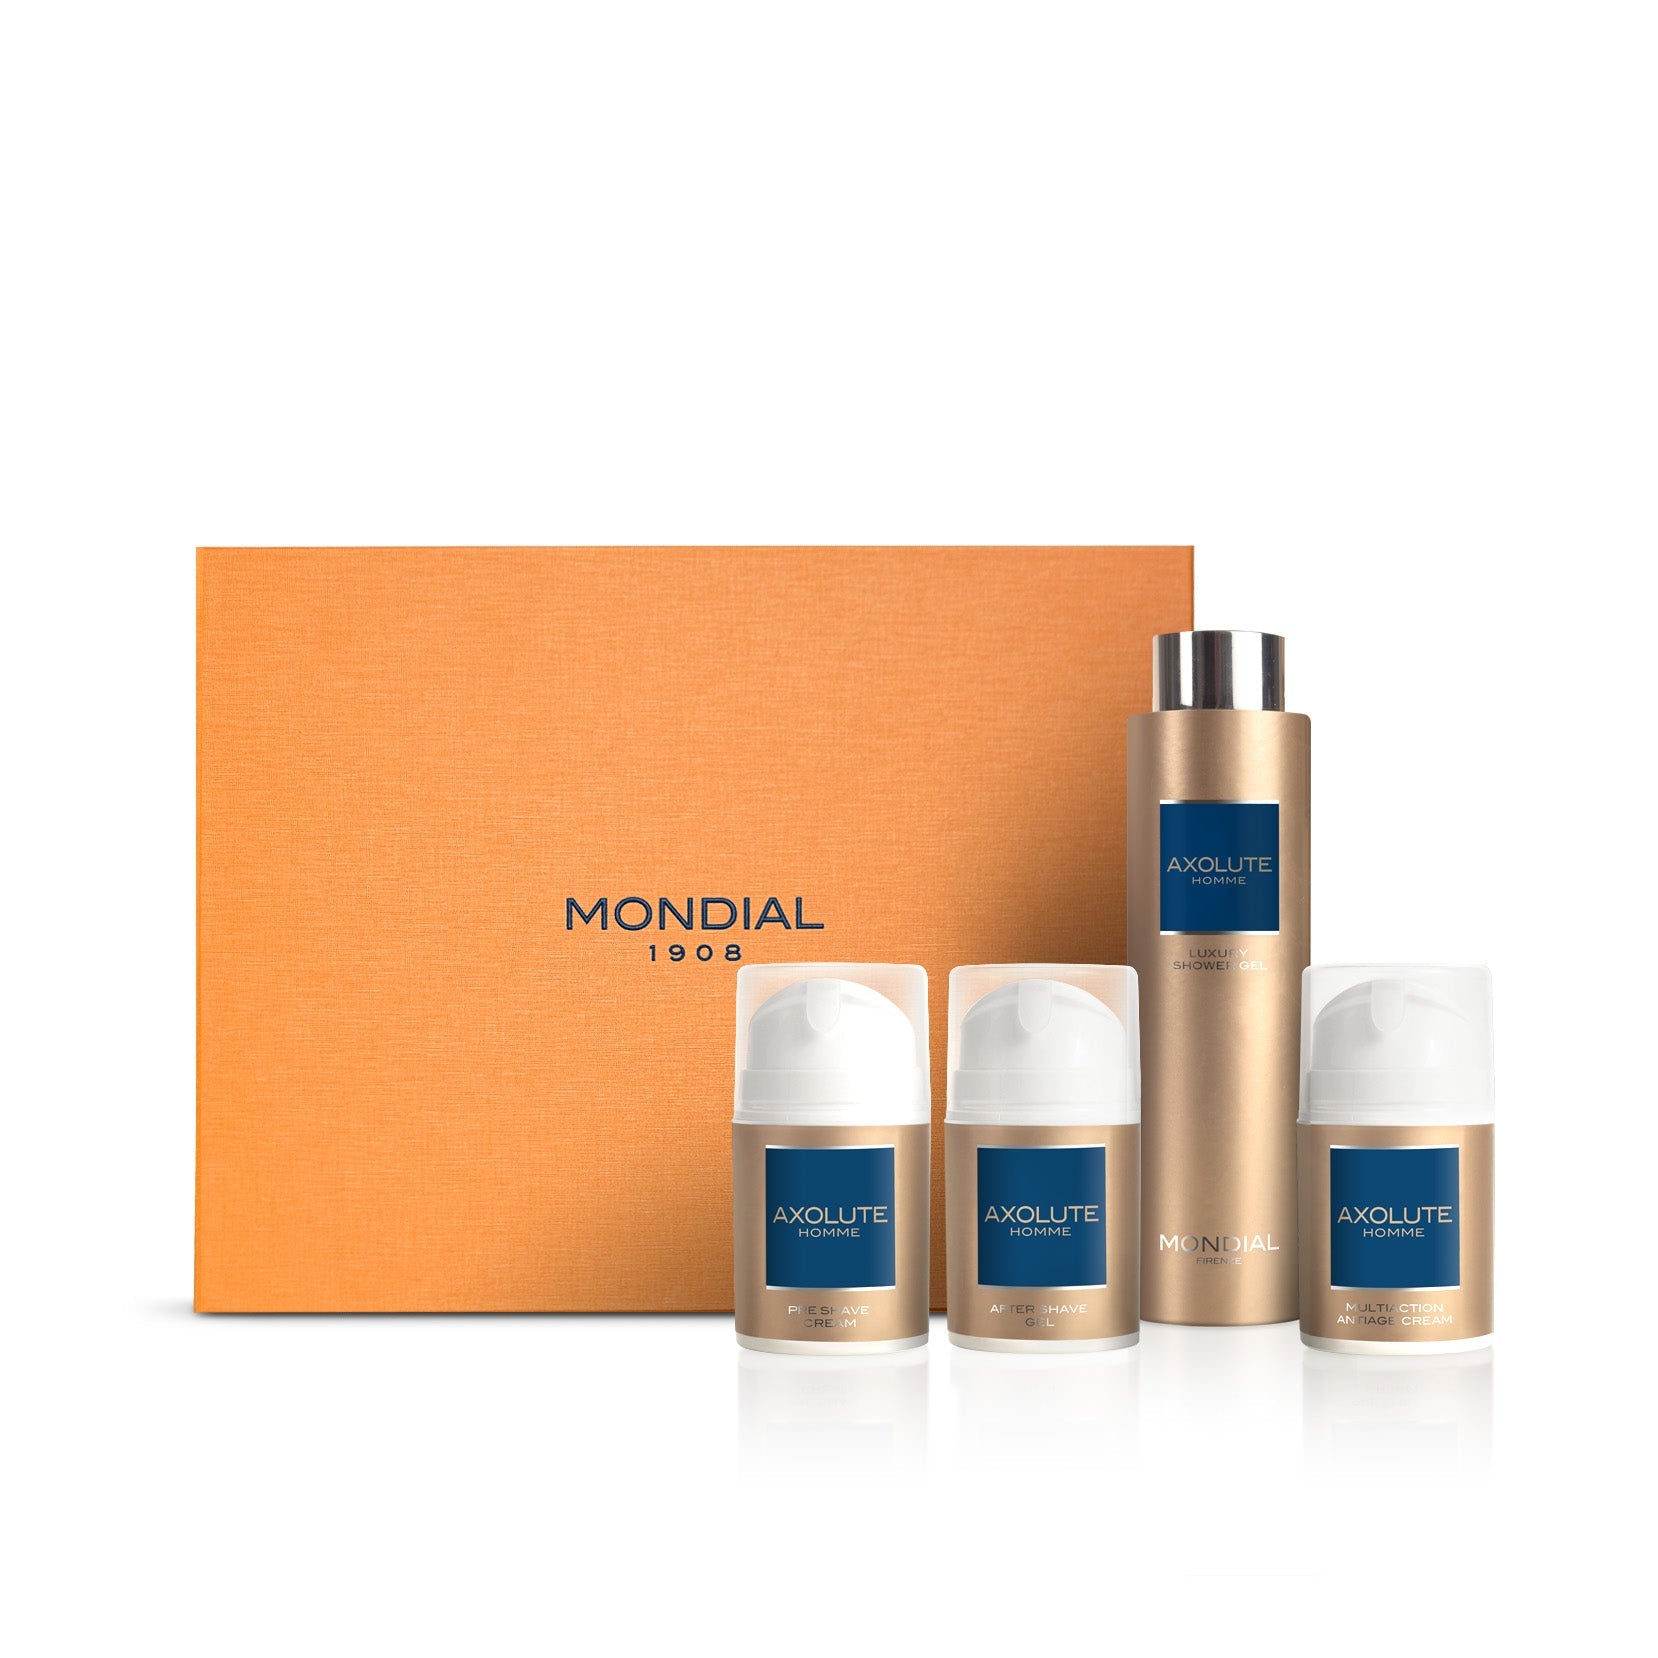 Gift Set Care EU with 1908 Royal: Mondial Shave Gel Shaving & Shower – Axolute Anti-Aging Cream